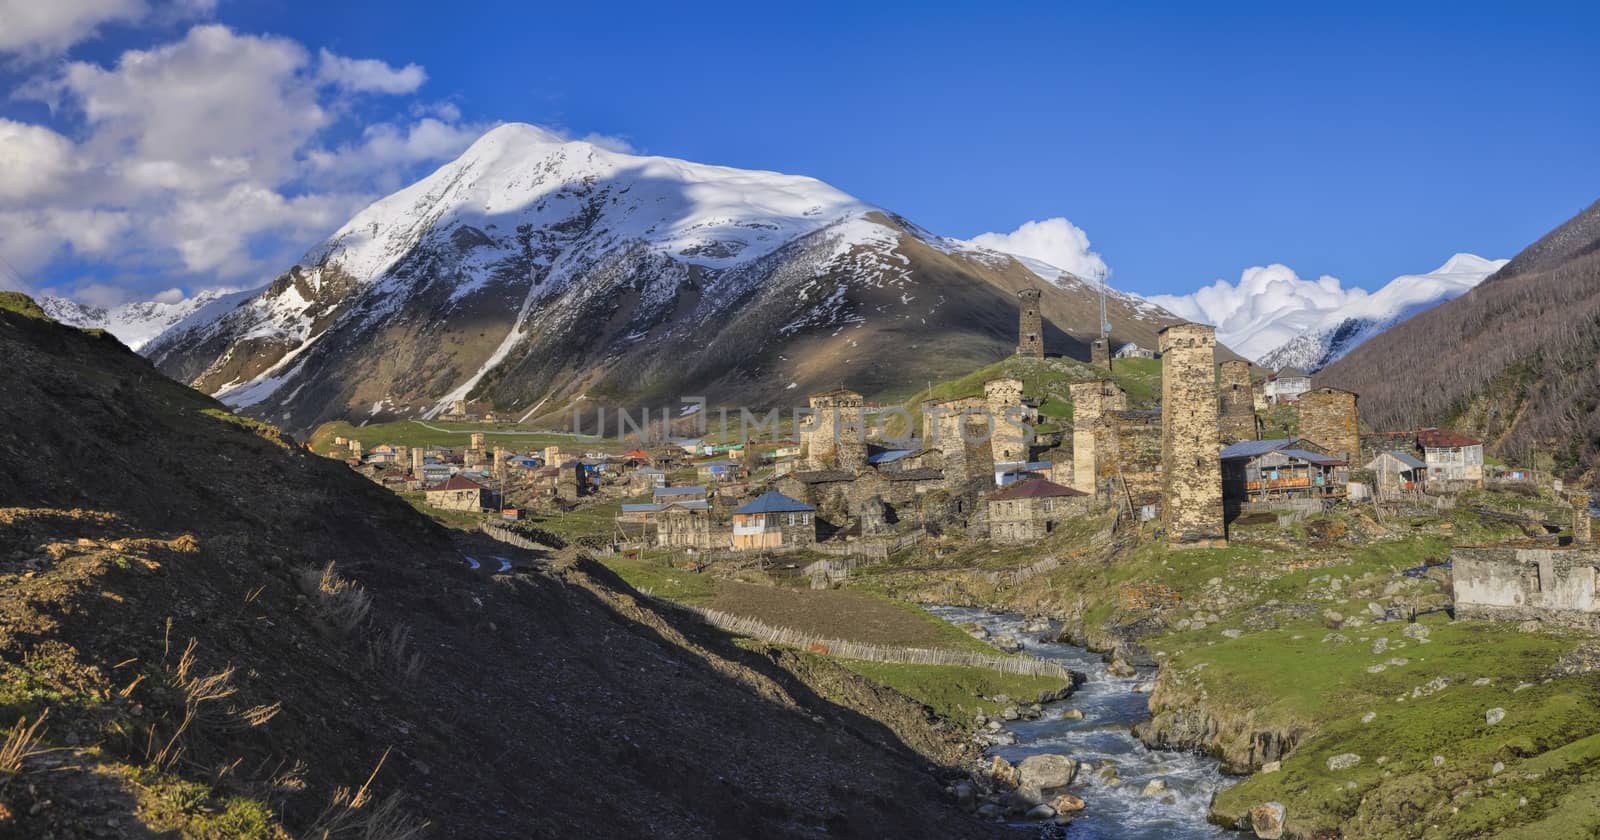 Scenic panorama of Svaneti in Georgia with traditional stone towers, symbol of the region